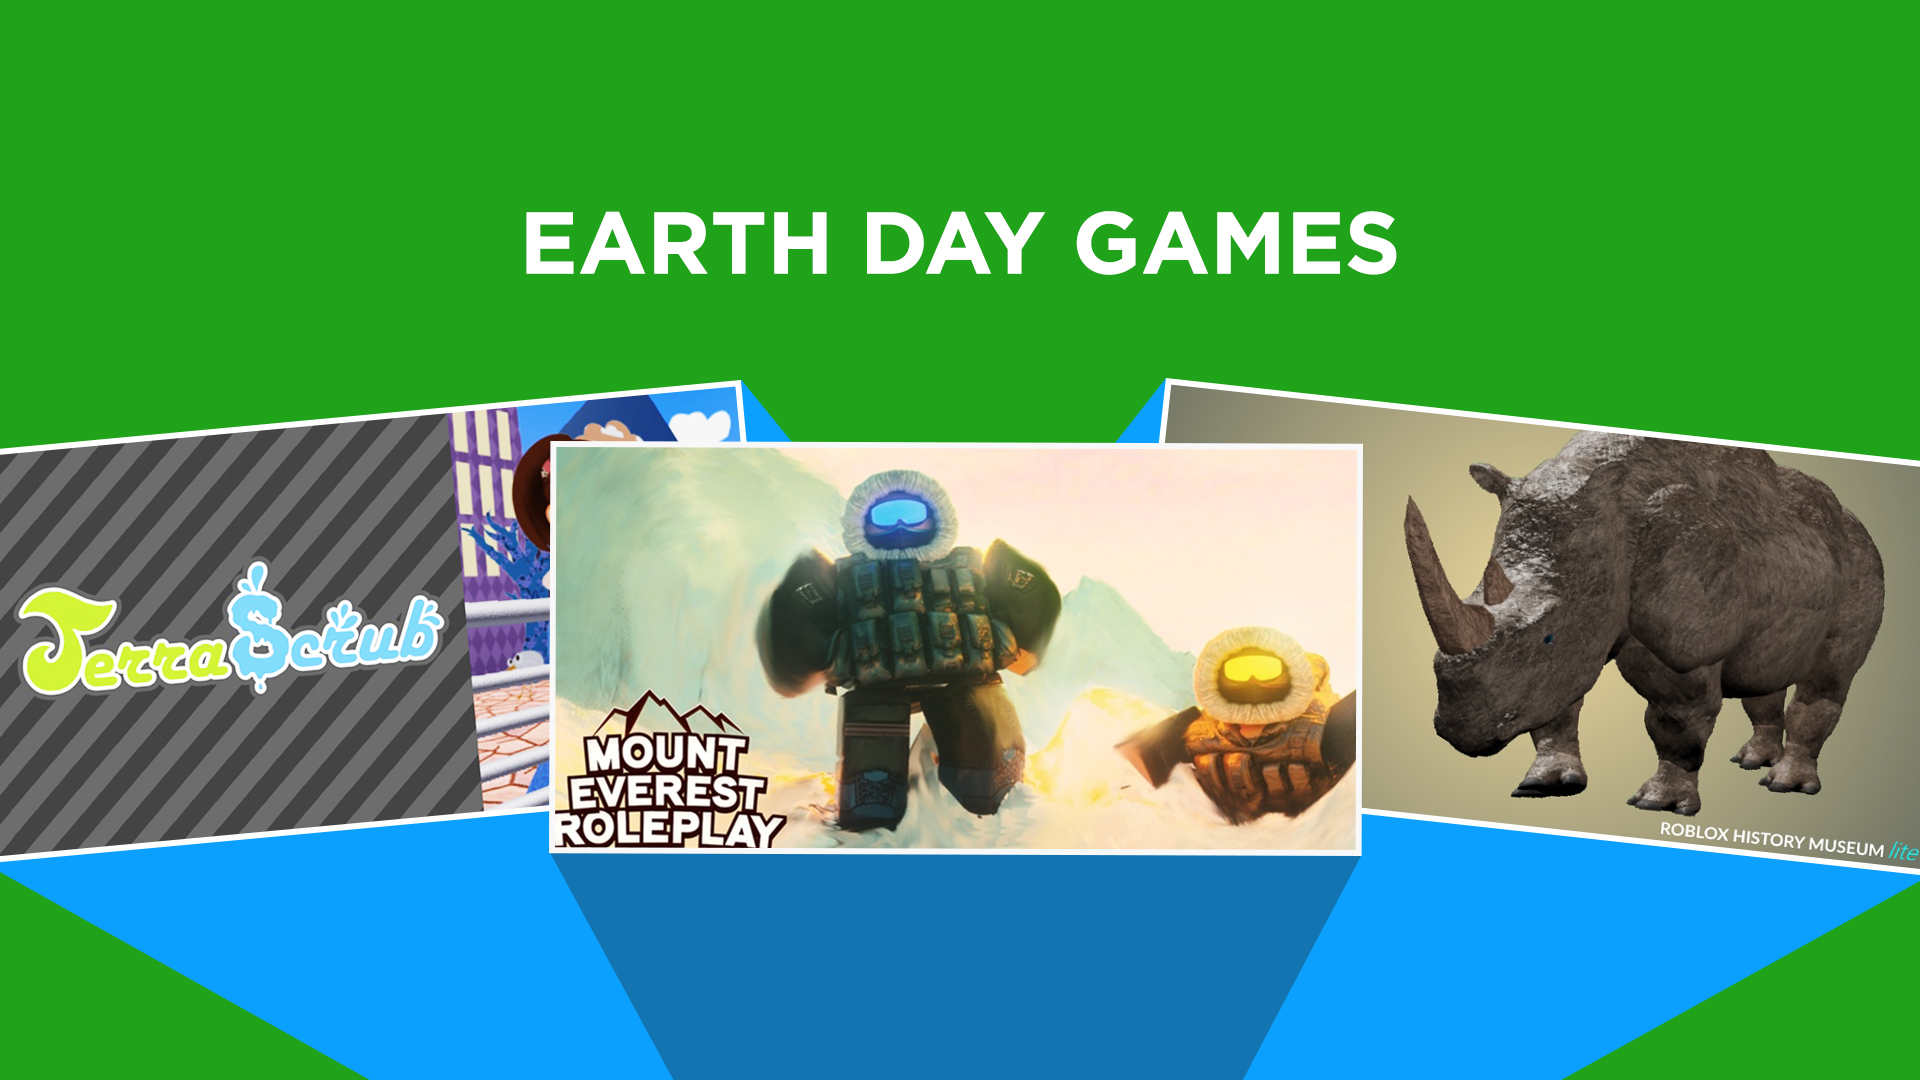 Roblox On Twitter In Celebration Of Earth Day We Re